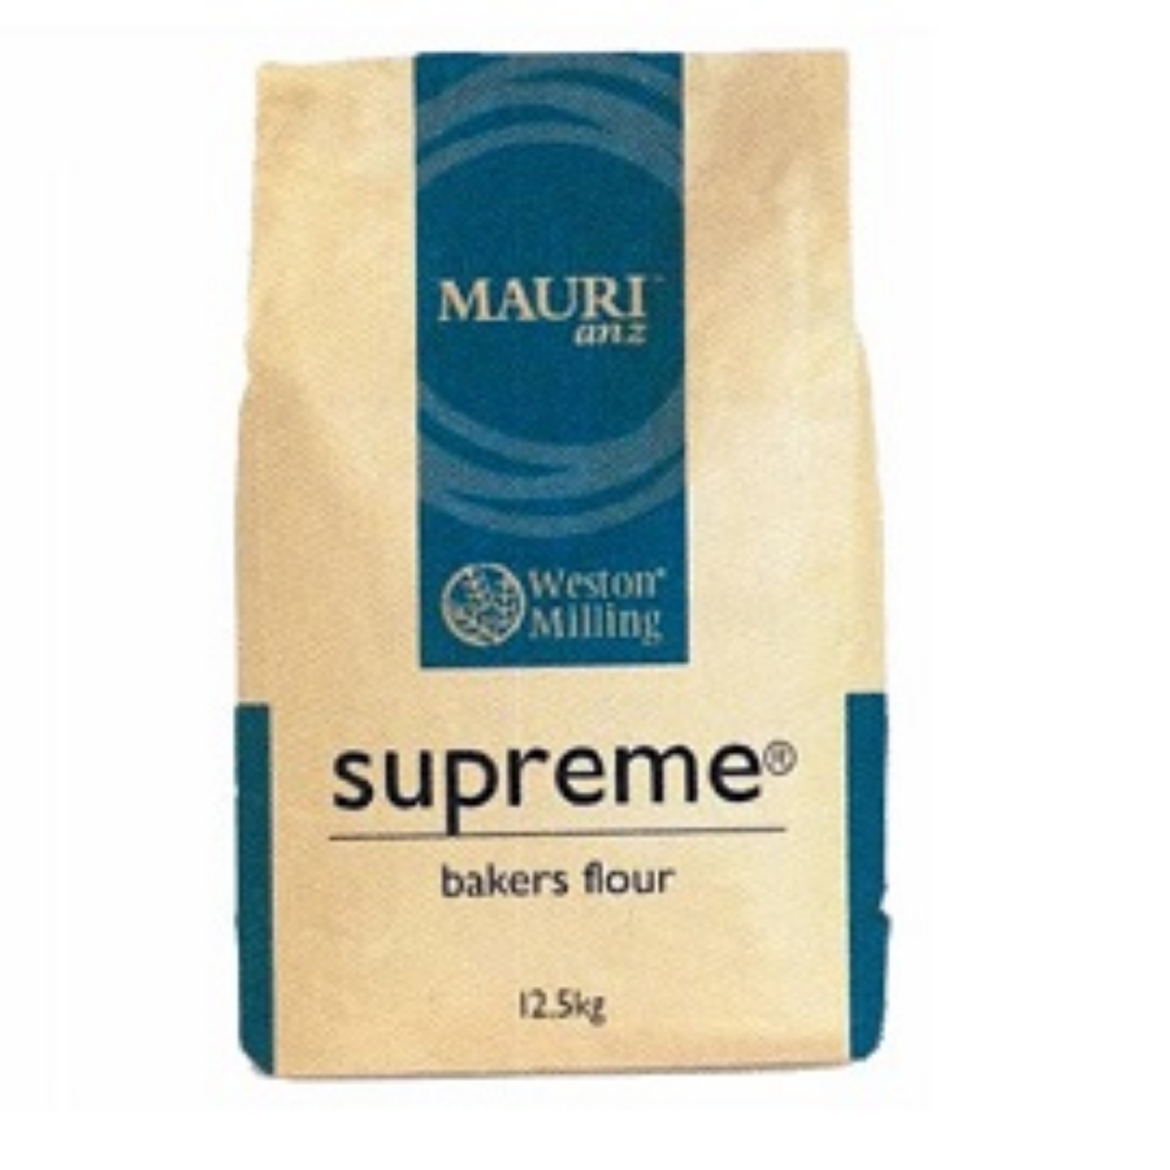 Picture of 12.5KG MAURI SUPREME BAKERS FLOUR